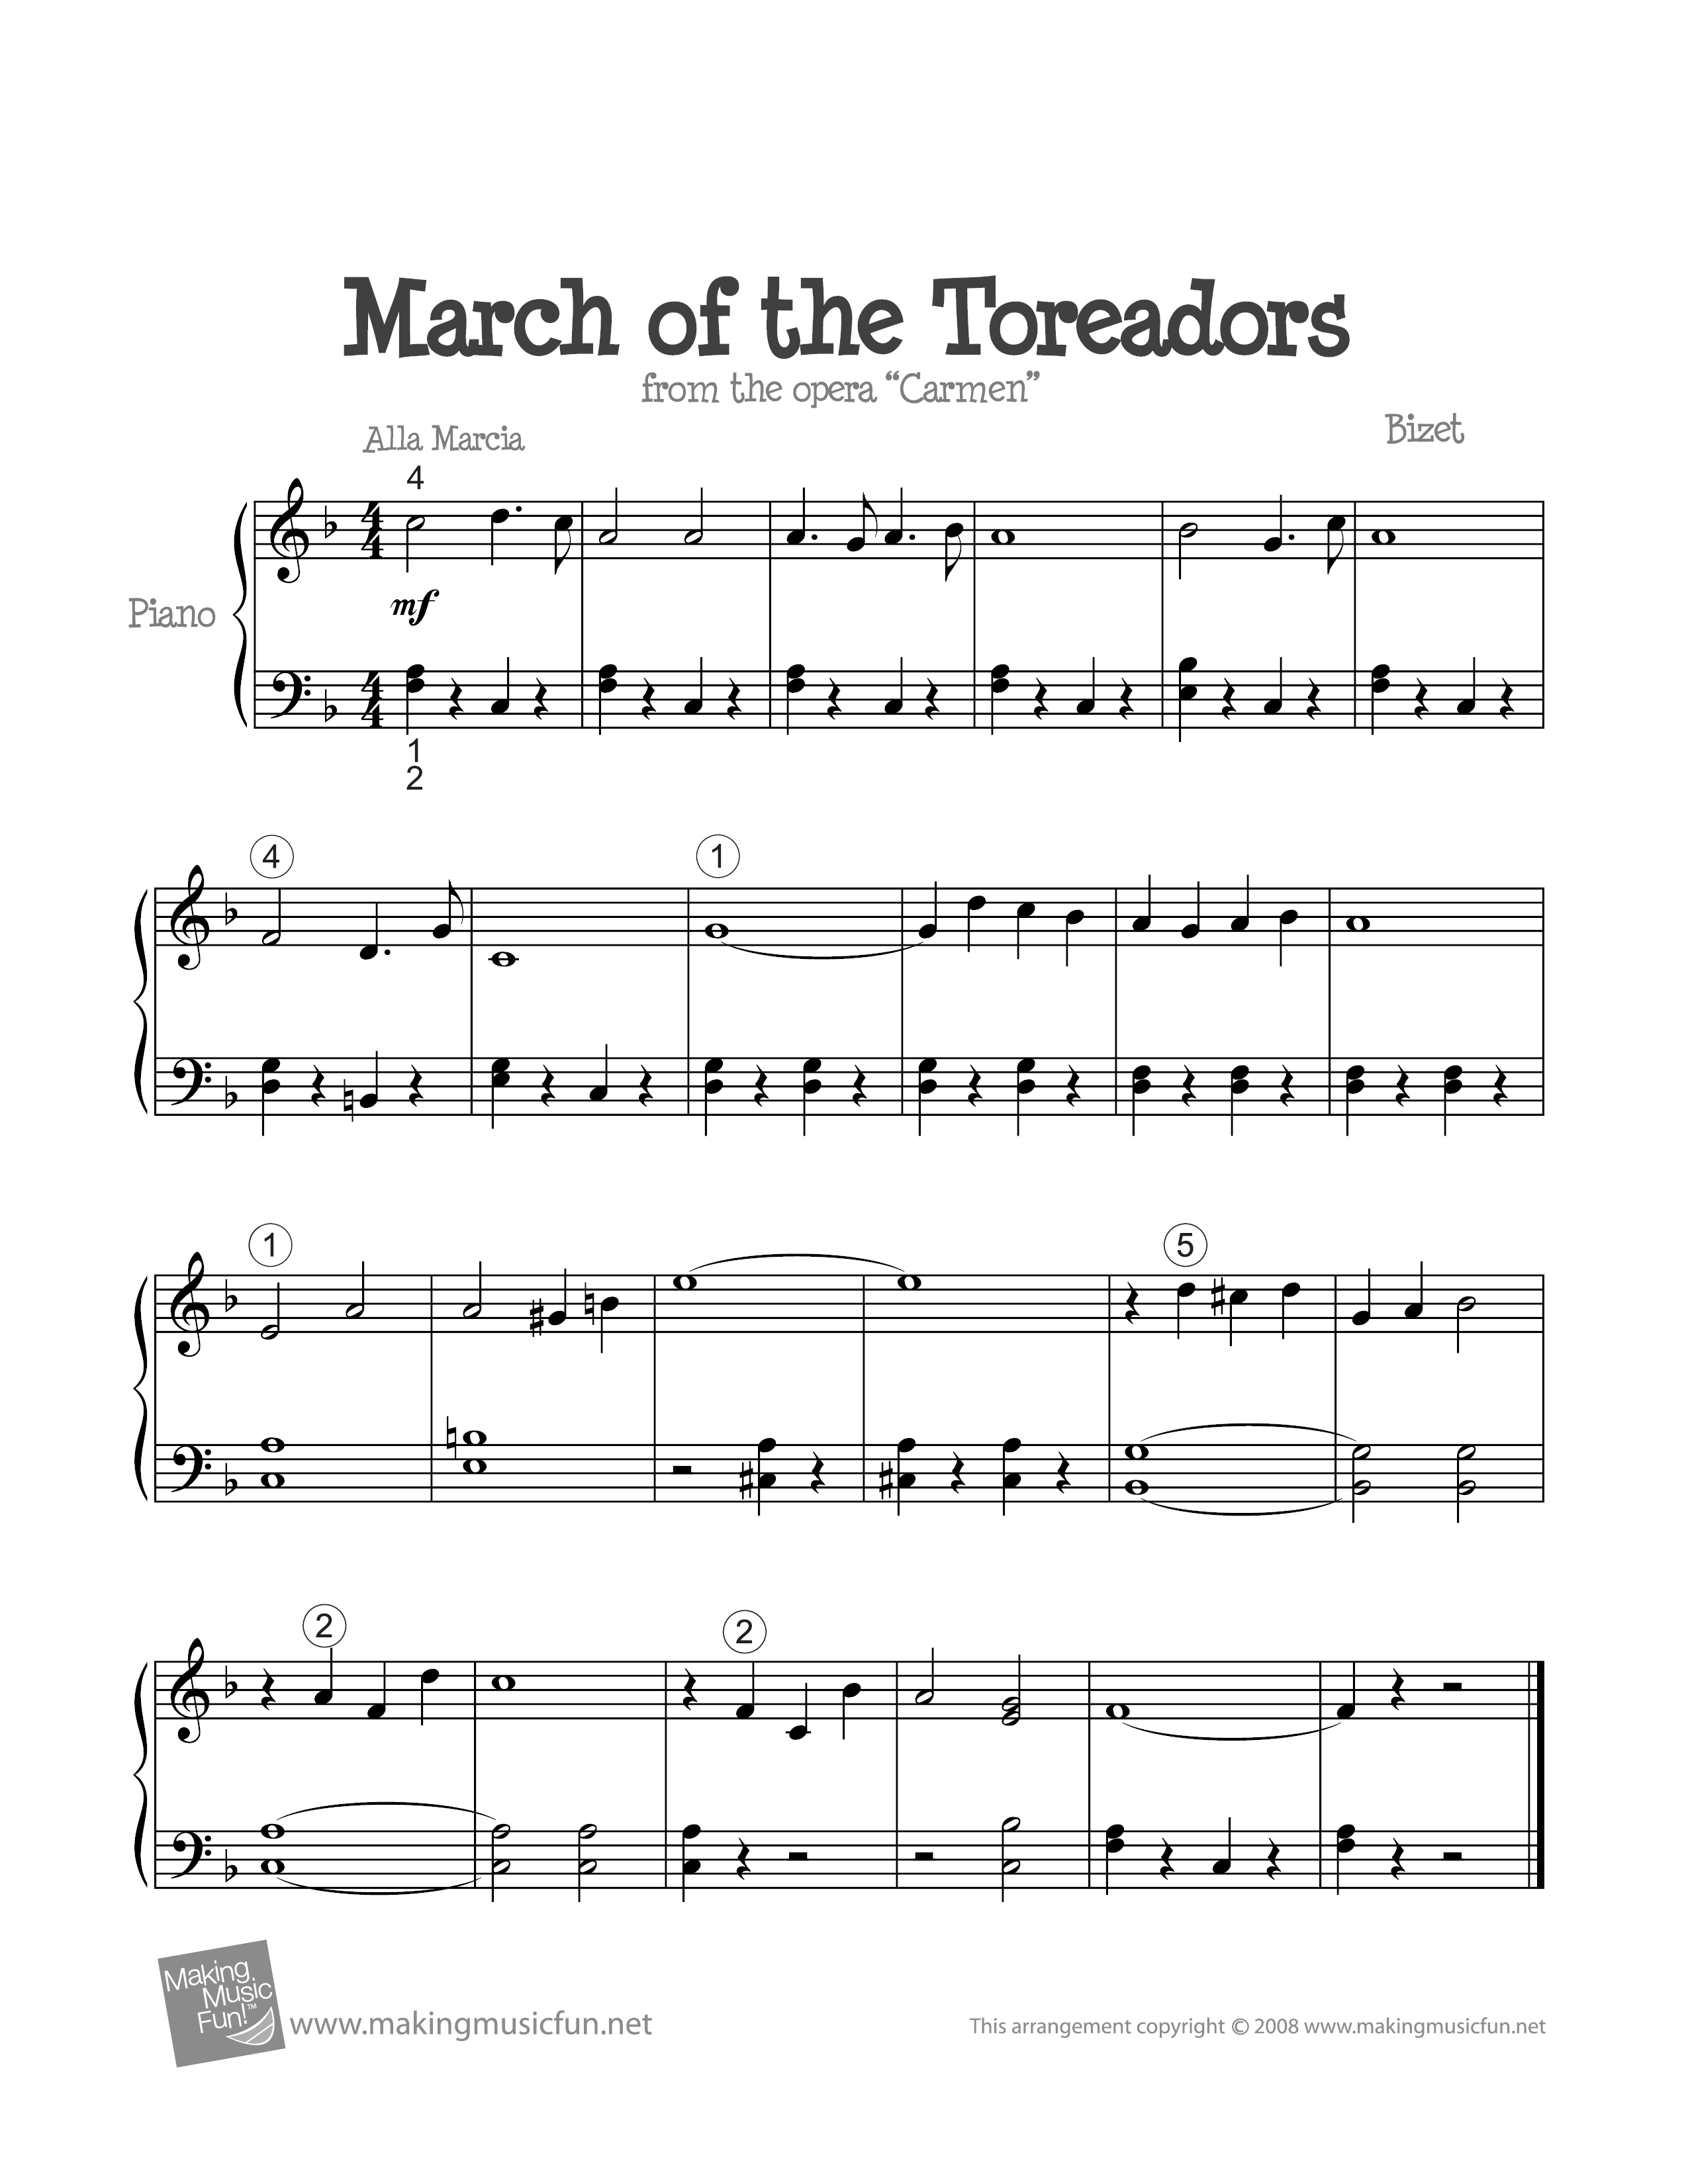 March of the Toreadors Score